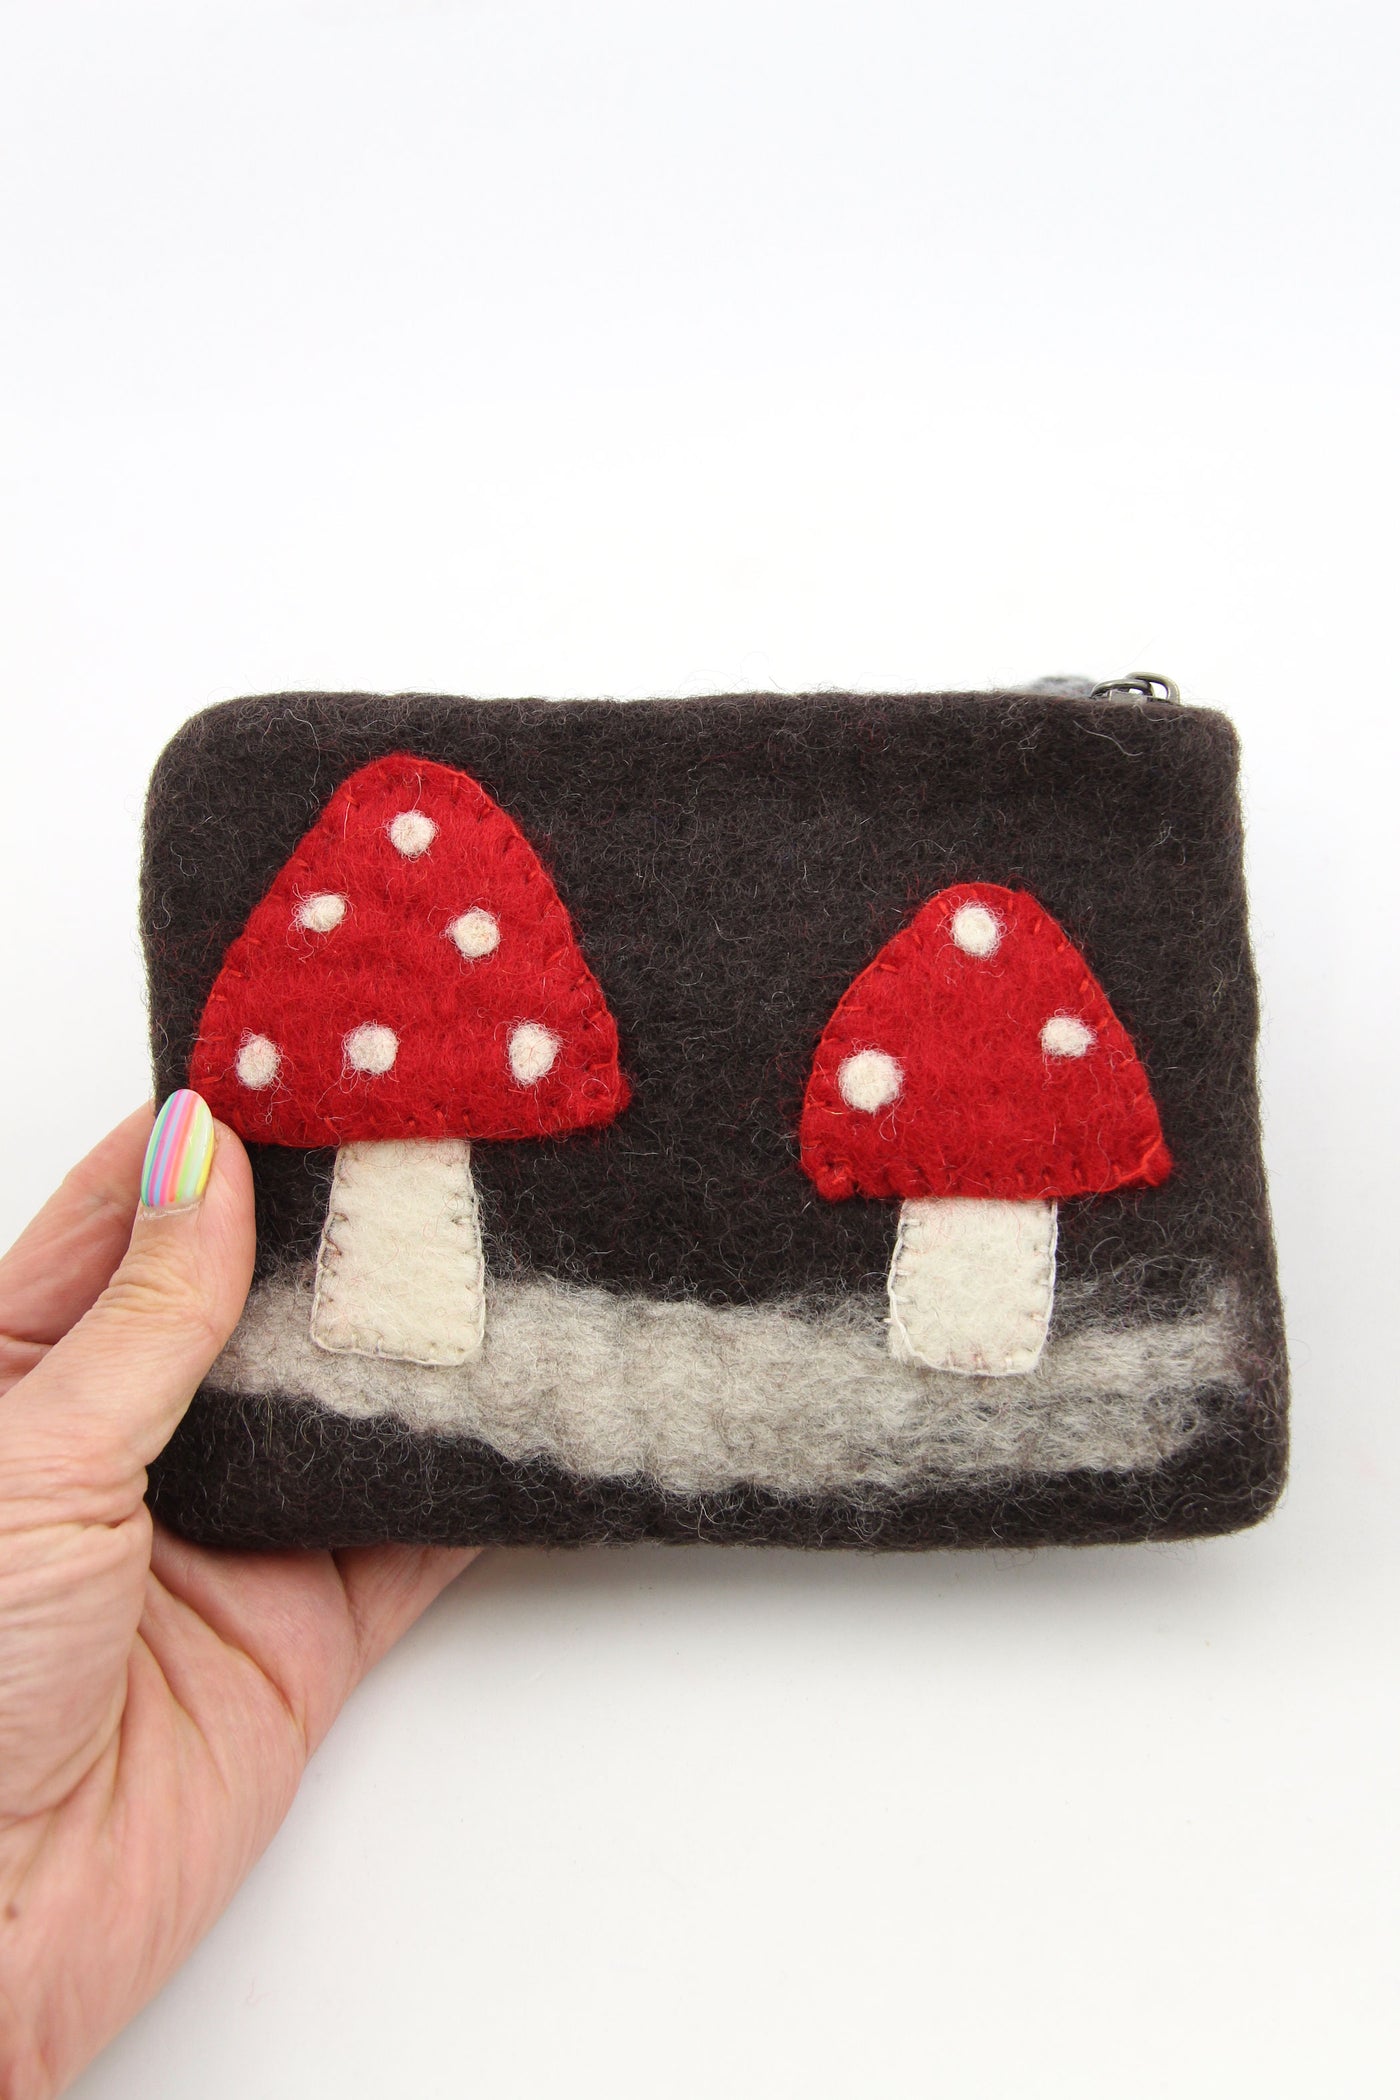 Mushroom Felted Wool Pouch, Coin Purse w/ Zipper, Fair Trade from Nepal for kids